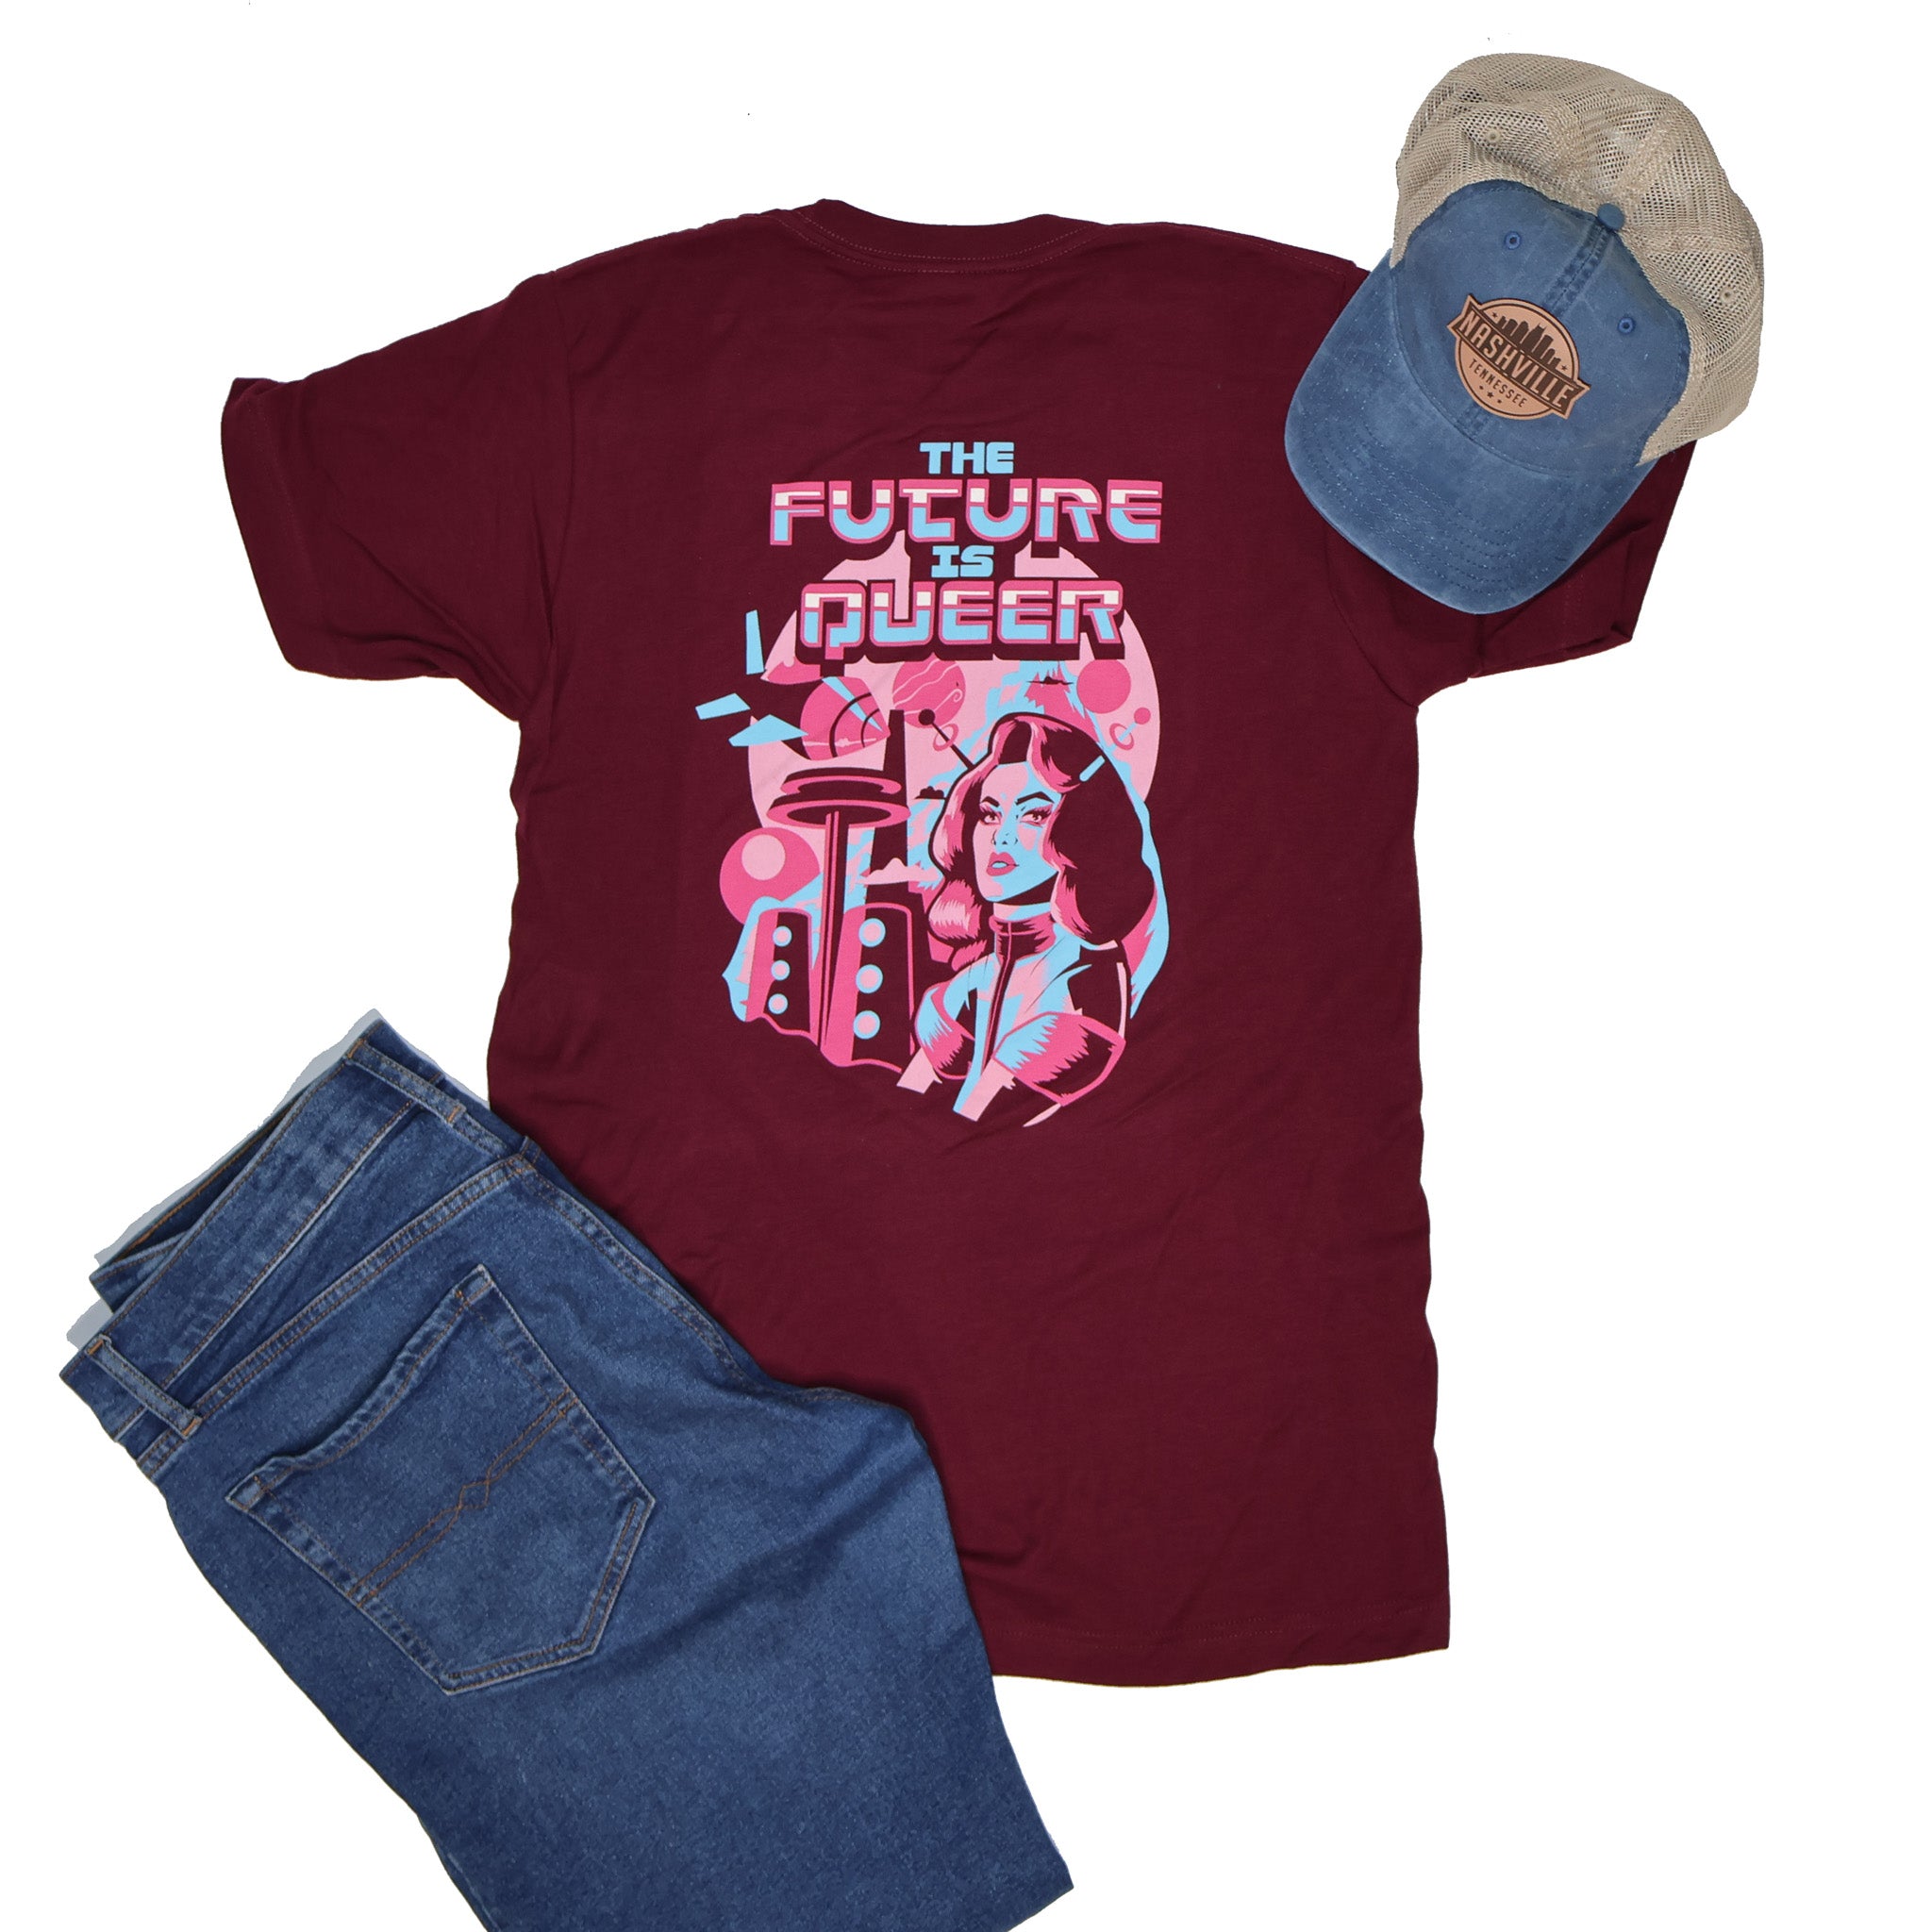 The Future is Queer Tee